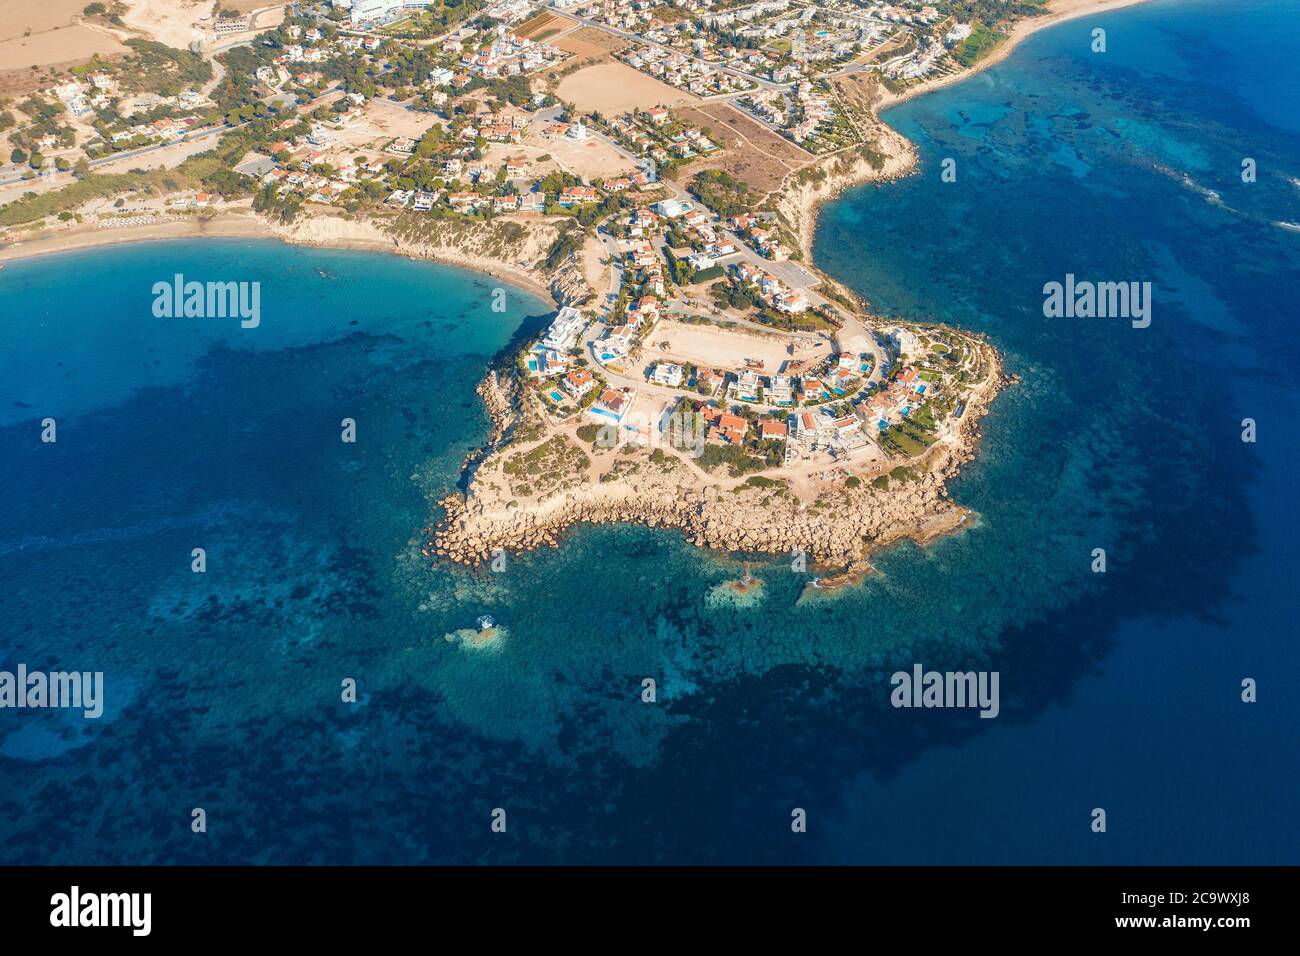 Aerial view of Cyprus coastline with blue sea. Stock Photo